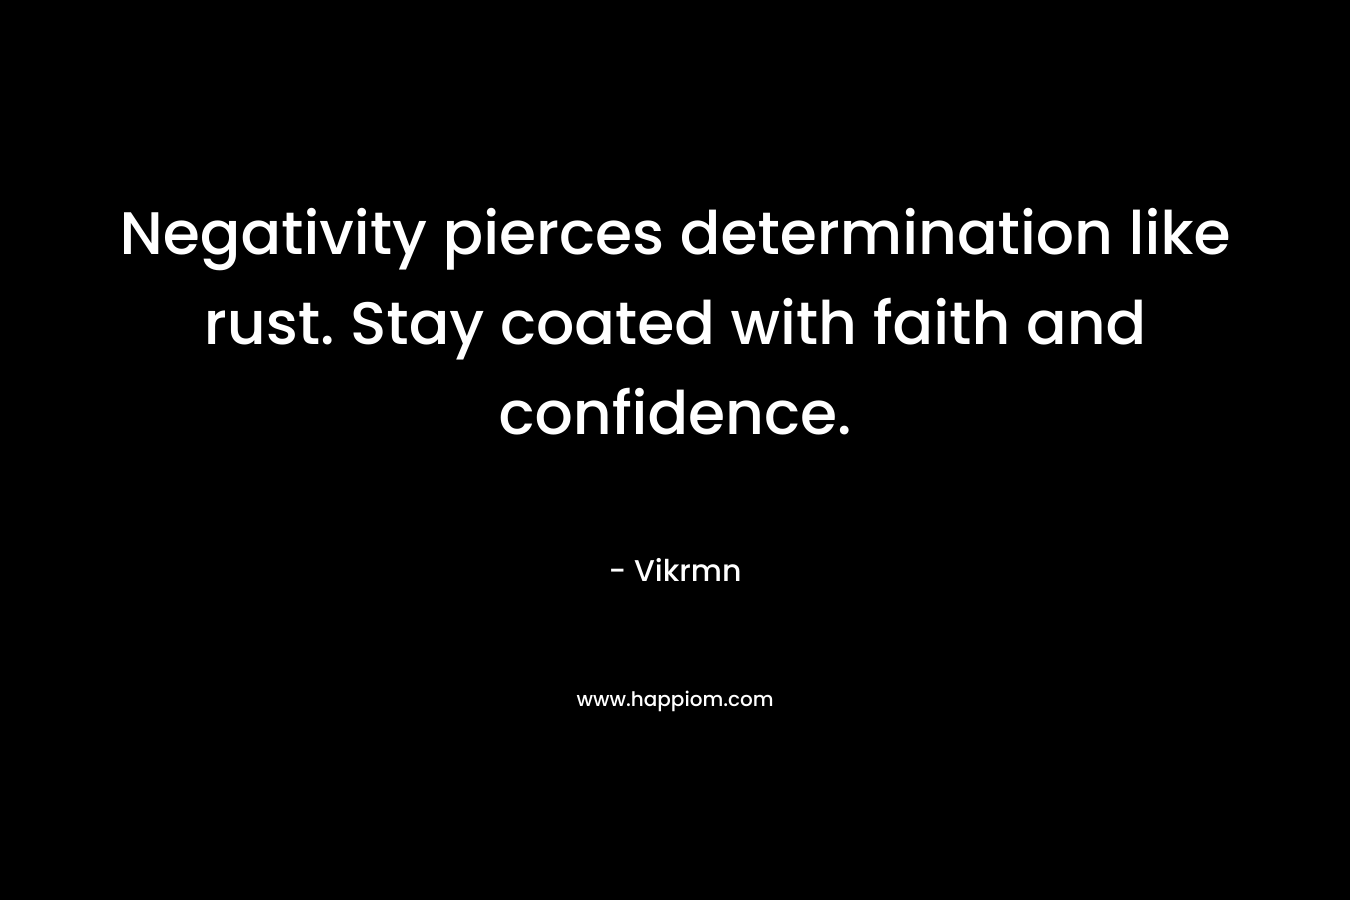 Negativity pierces determination like rust. Stay coated with faith and confidence. – Vikrmn